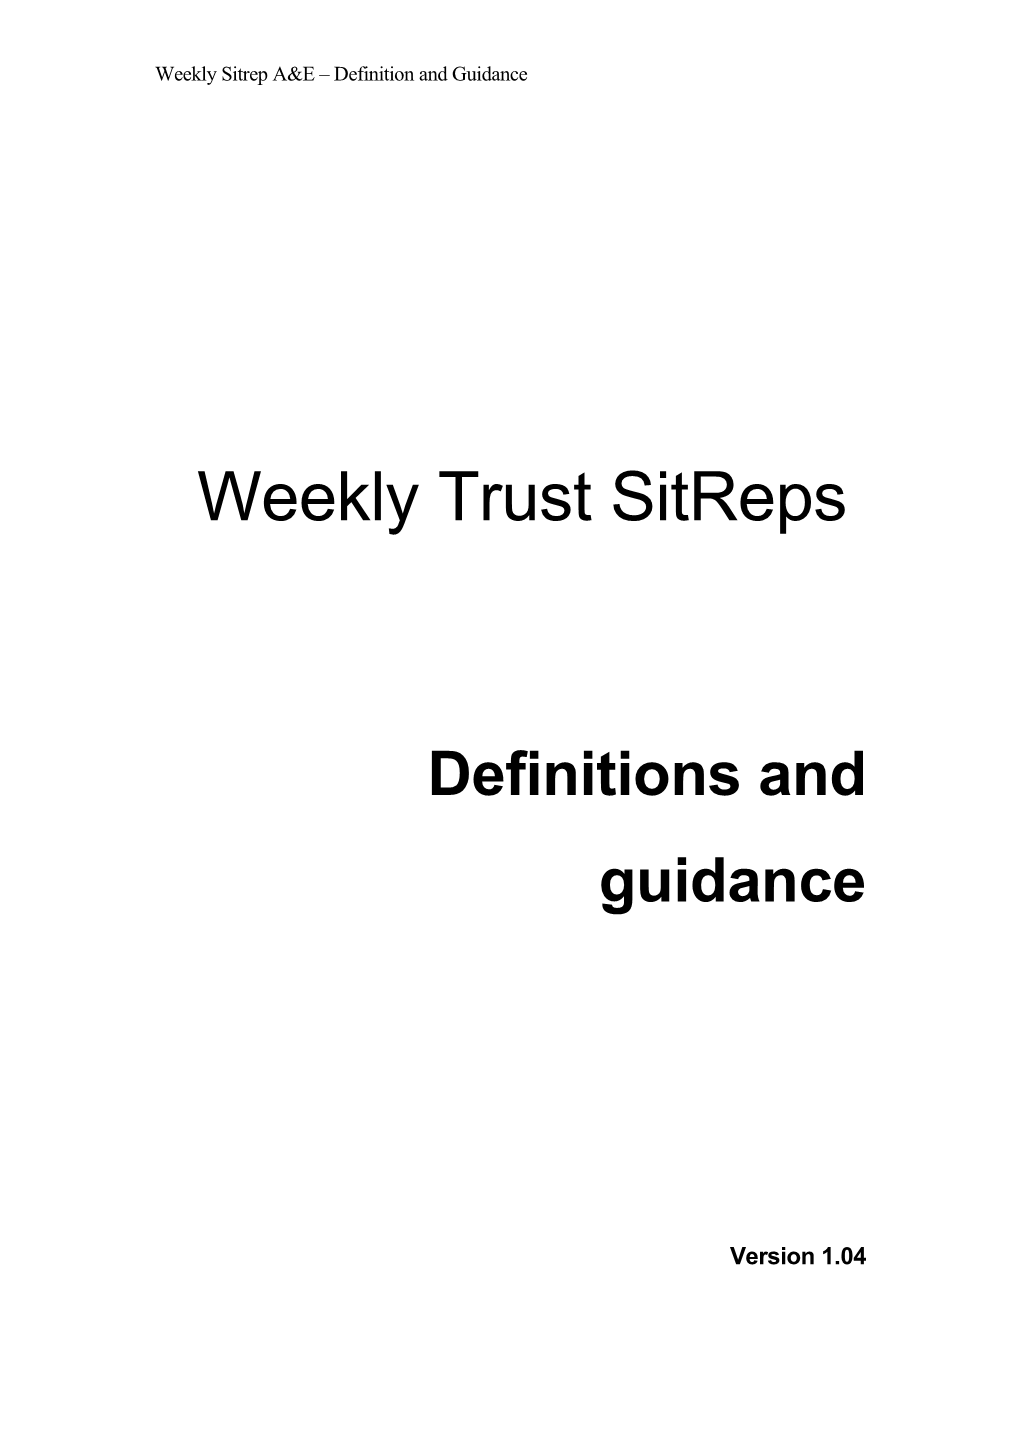 Weekly Trust Sitreps